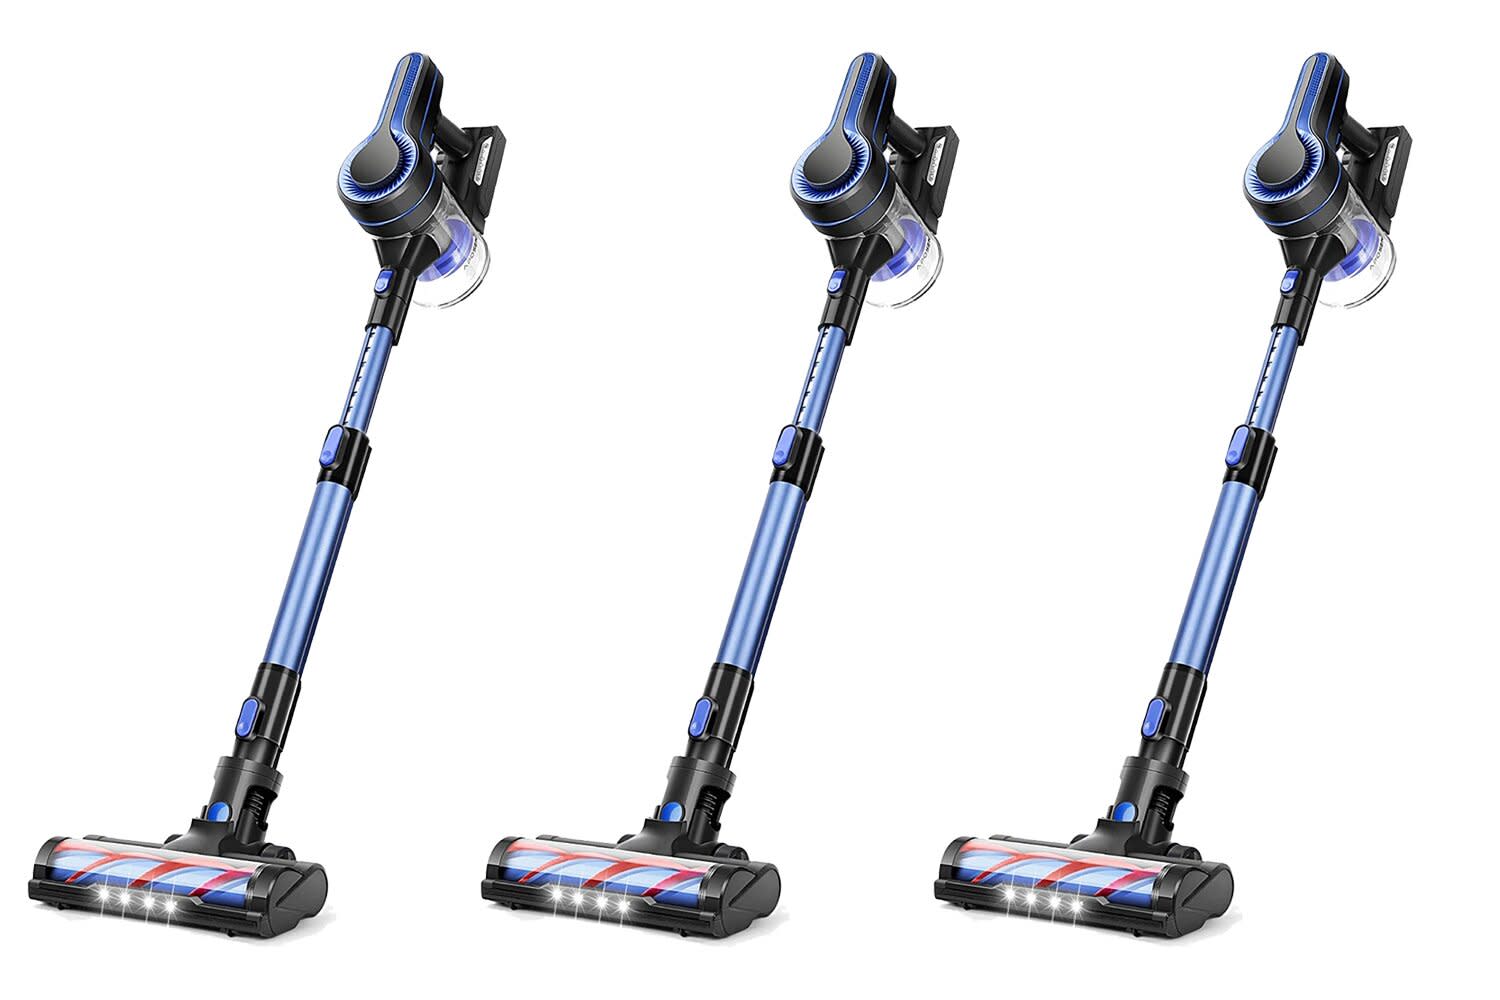 Amazon Shoppers Say This TopRated Stick Vacuum Makes Cleaning 'Fun and